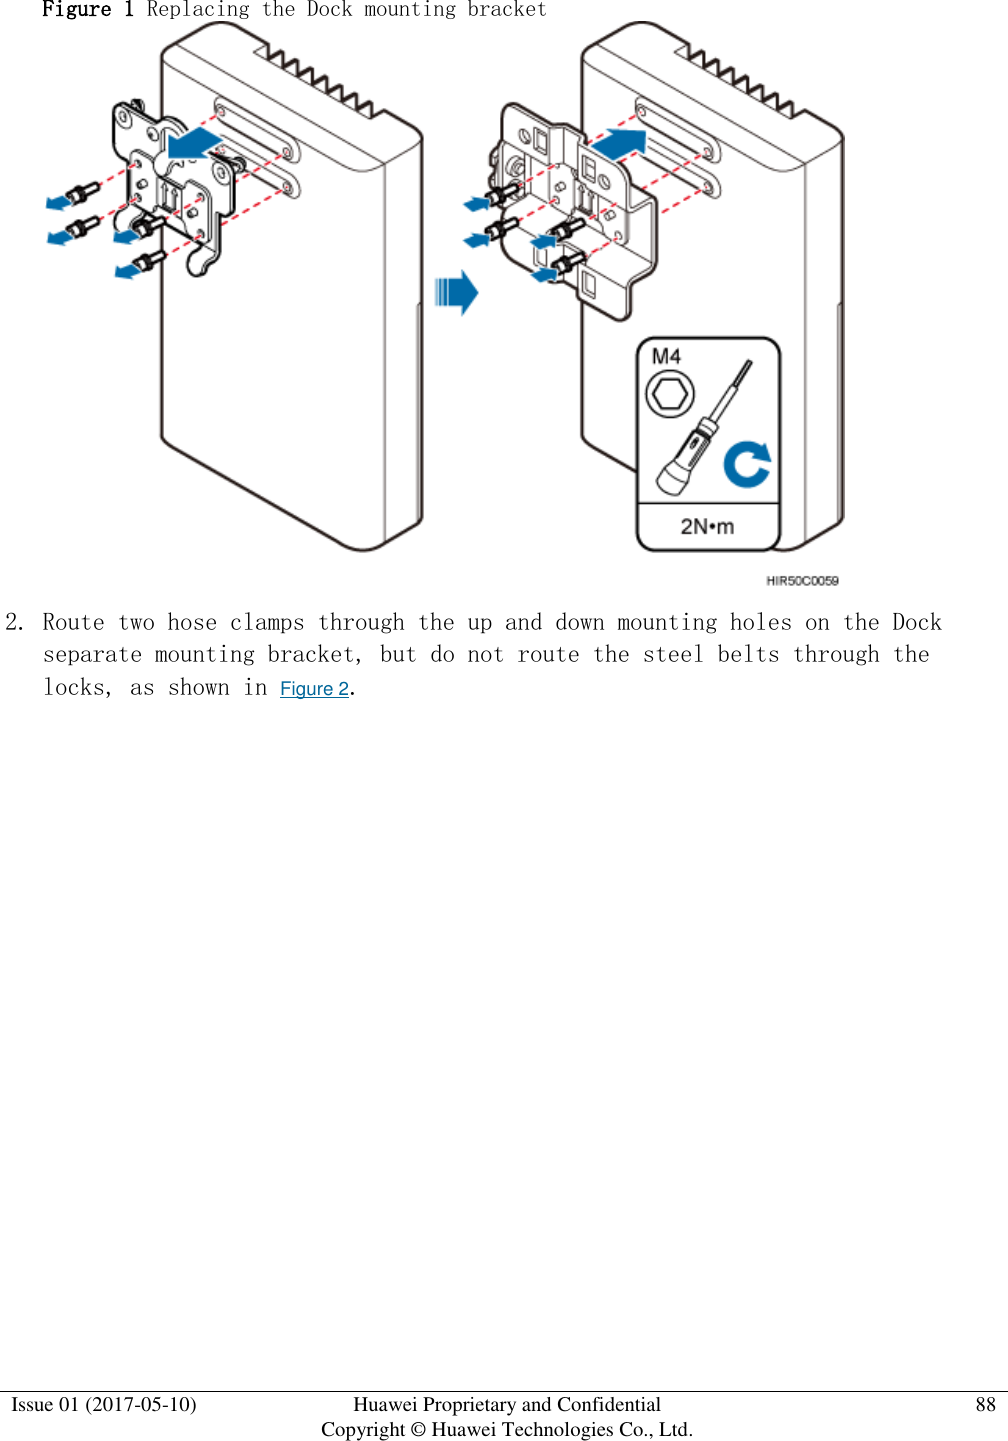  Issue 01 (2017-05-10) Huawei Proprietary and Confidential      Copyright © Huawei Technologies Co., Ltd. 88  Figure 1 Replacing the Dock mounting bracket   2. Route two hose clamps through the up and down mounting holes on the Dock separate mounting bracket, but do not route the steel belts through the locks, as shown in Figure 2.  